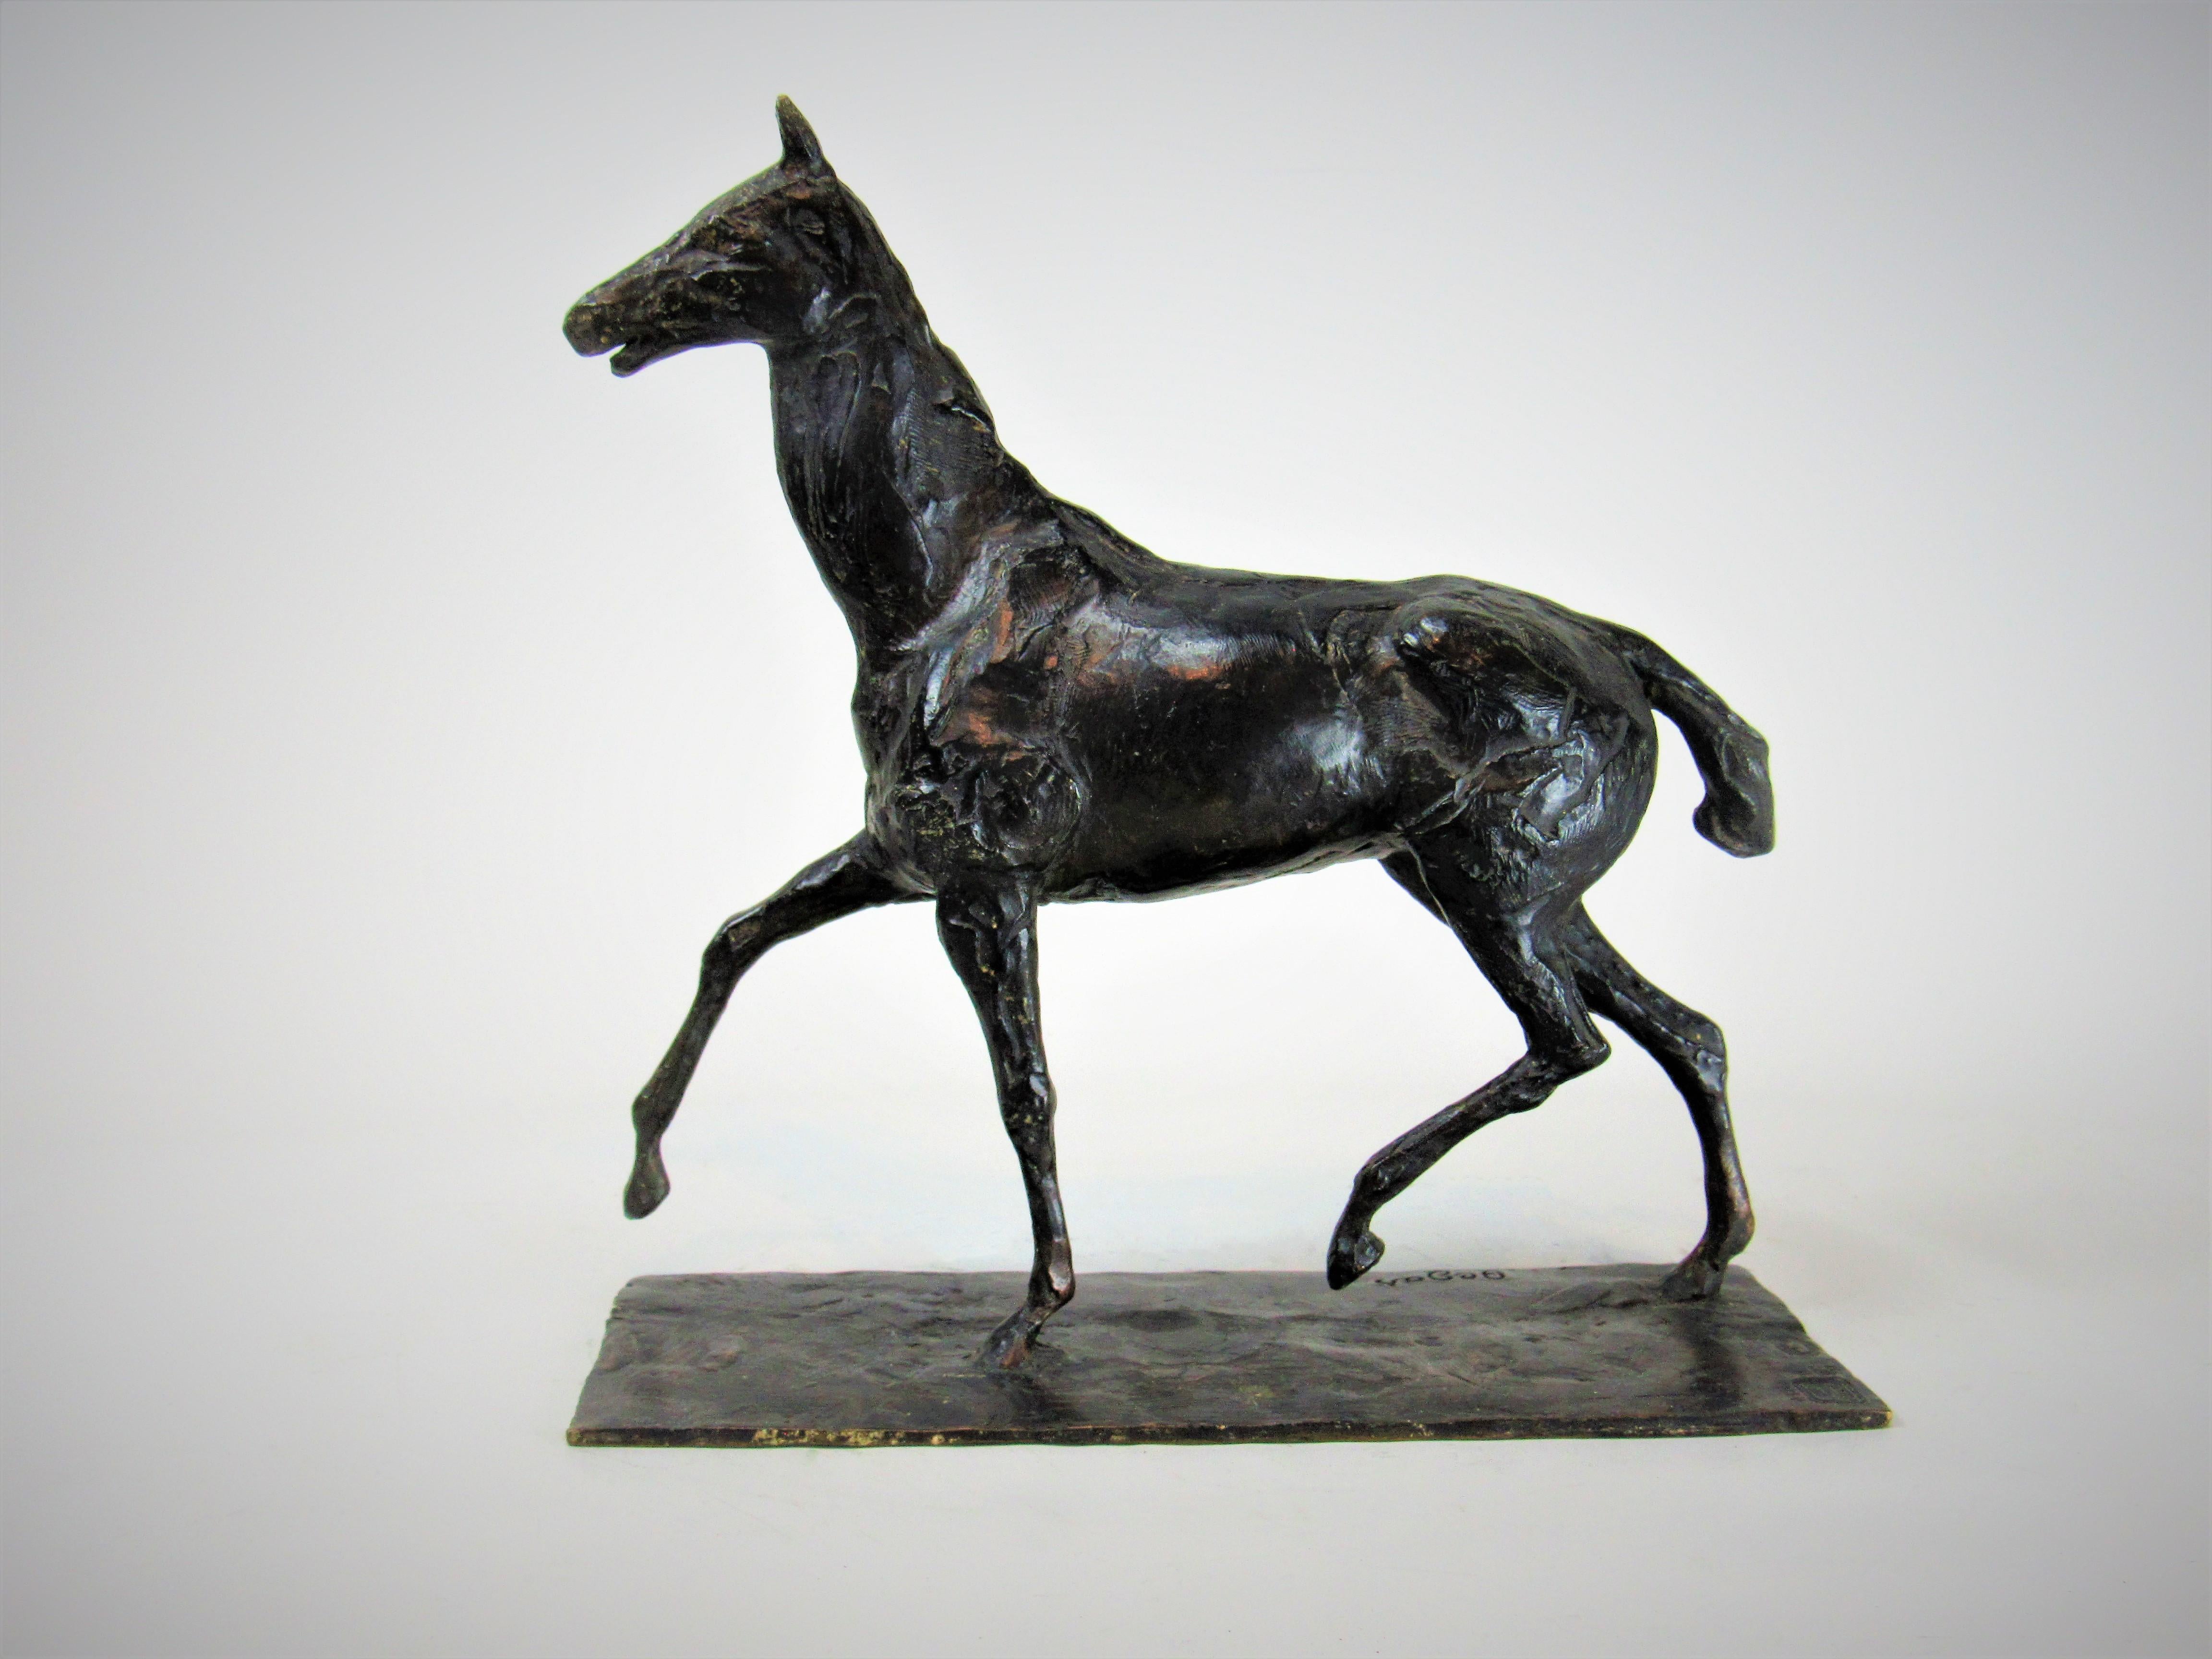 Certified Edgard Degas Bronze of a horse : (Horse walking at a high pace)